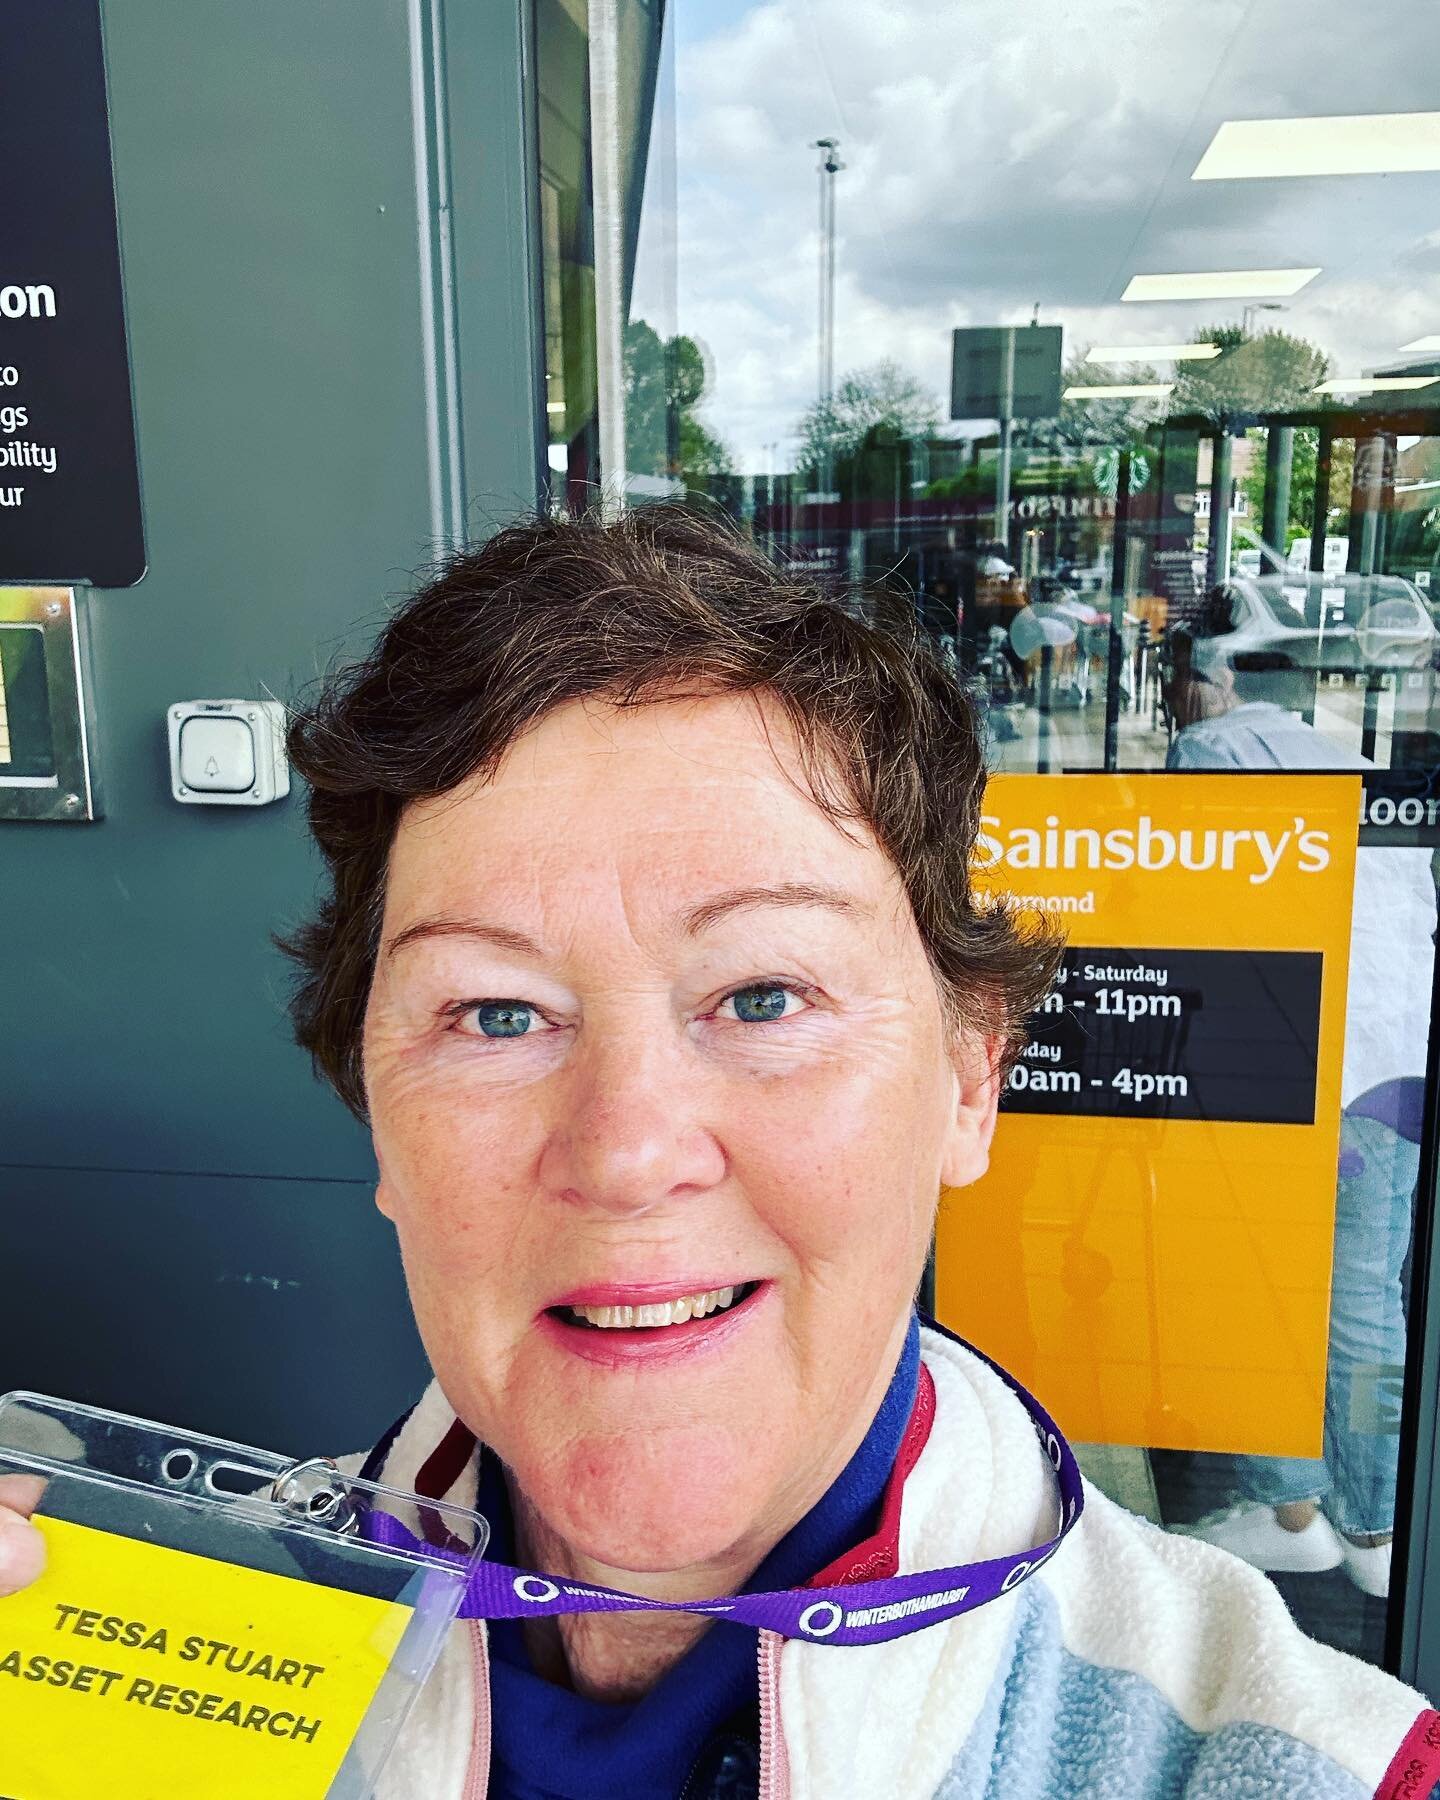 It&rsquo;s rare I mention my day job here and it&rsquo;s time to change that.

🛒 I&rsquo;m Tessa Stuart, a supermarket shopper researcher. I talk to shoppers when they are food and drink shopping about their choices and what catches their eye. 

📚 